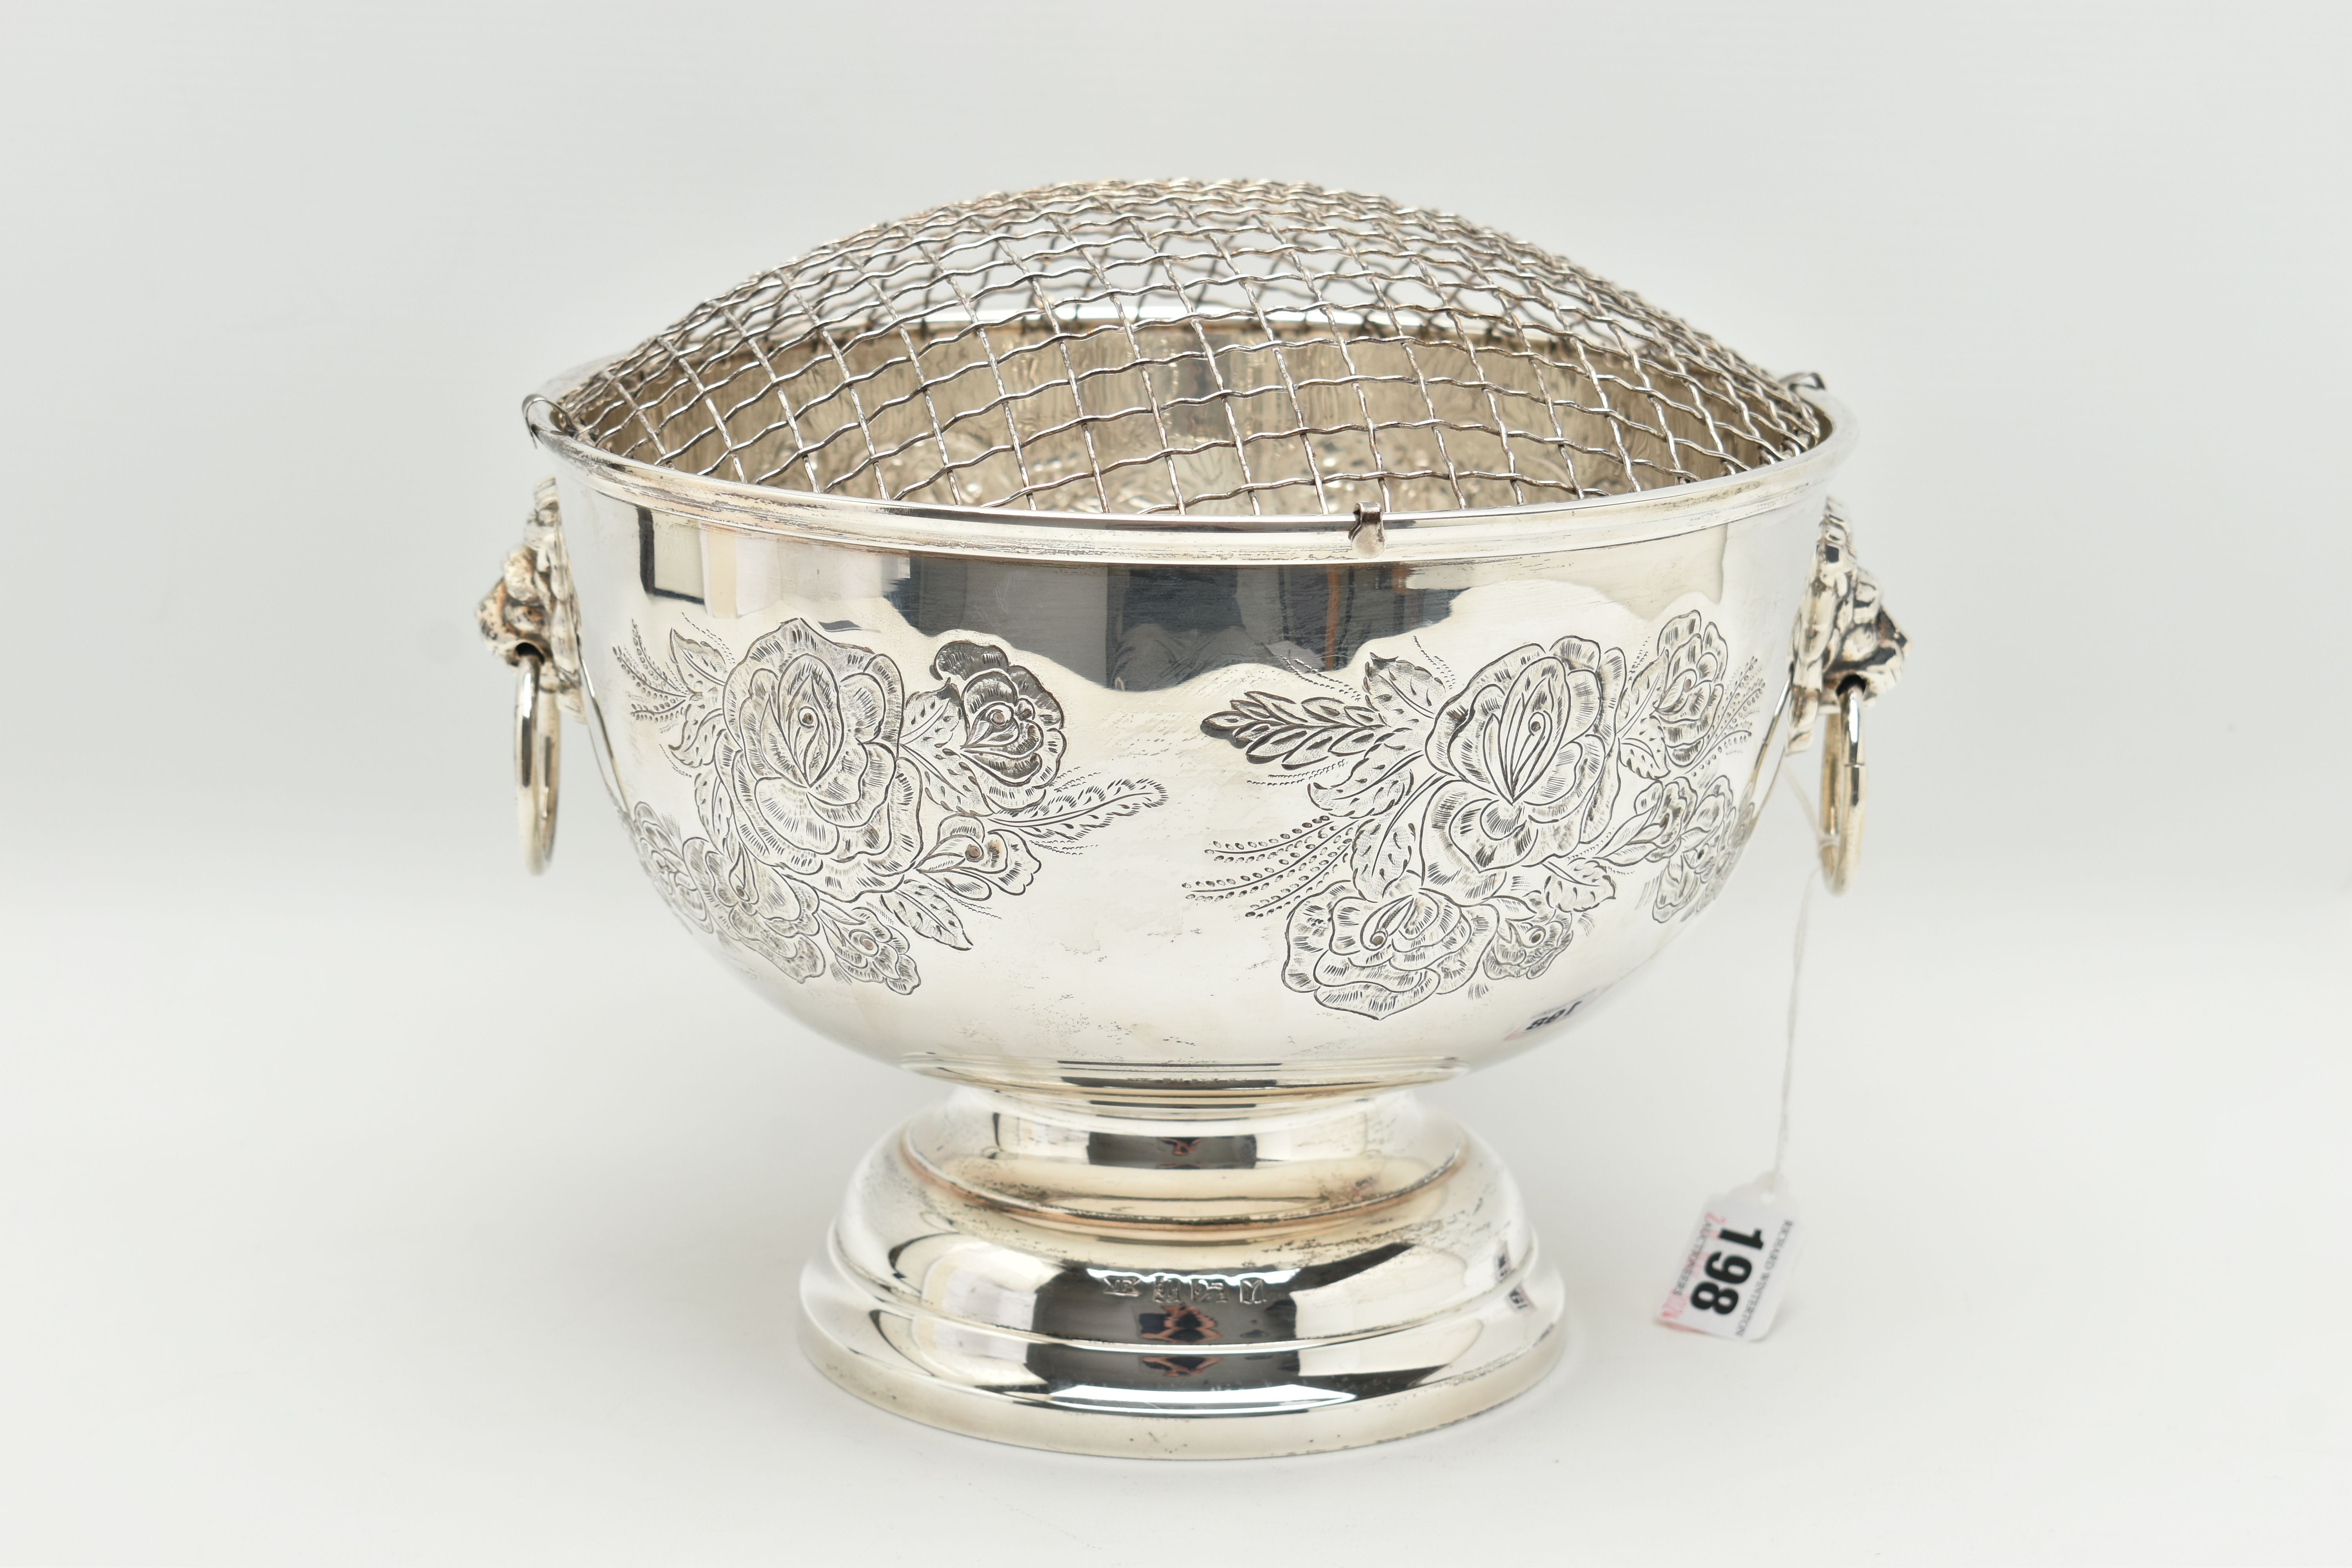 AN ELIZABETH II SILVER ROSE BOWL, fitted with removable wire grille, two lion mask handles, the